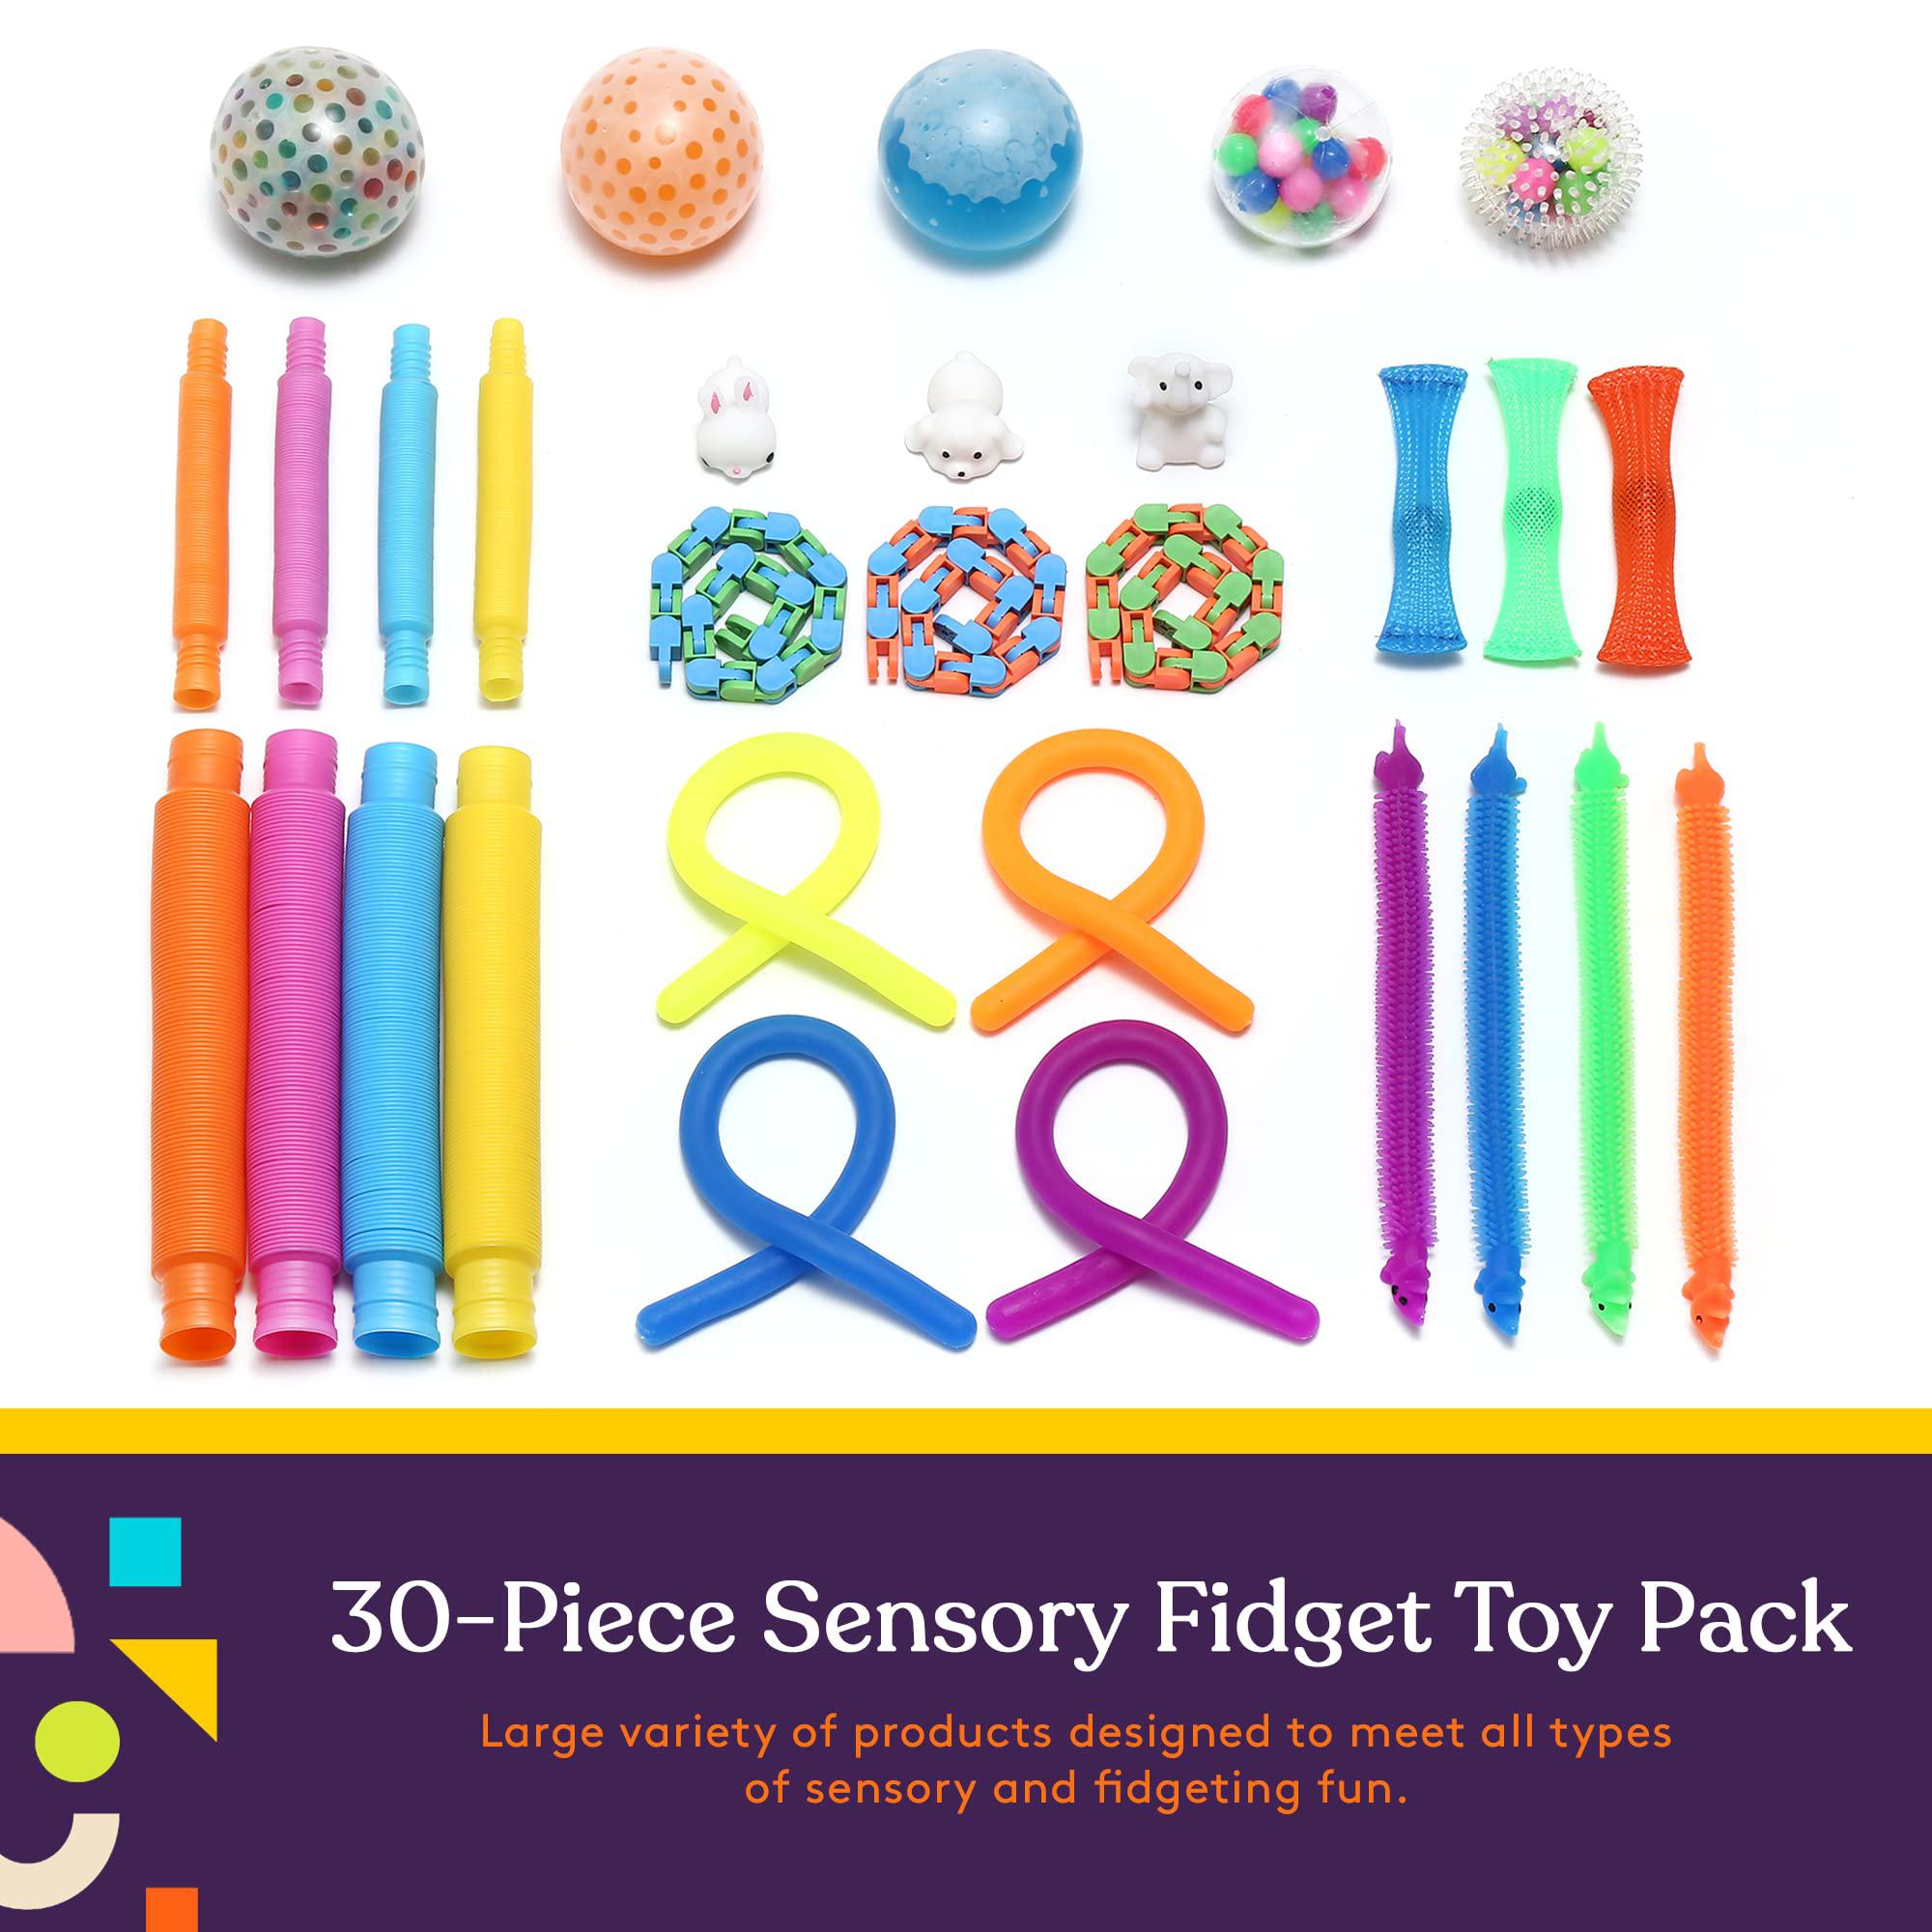 special supplies fidget toy pack fidget kit for kids, 30 pc. set, interactive sensory toys with squishy balls, fun tubes, squ